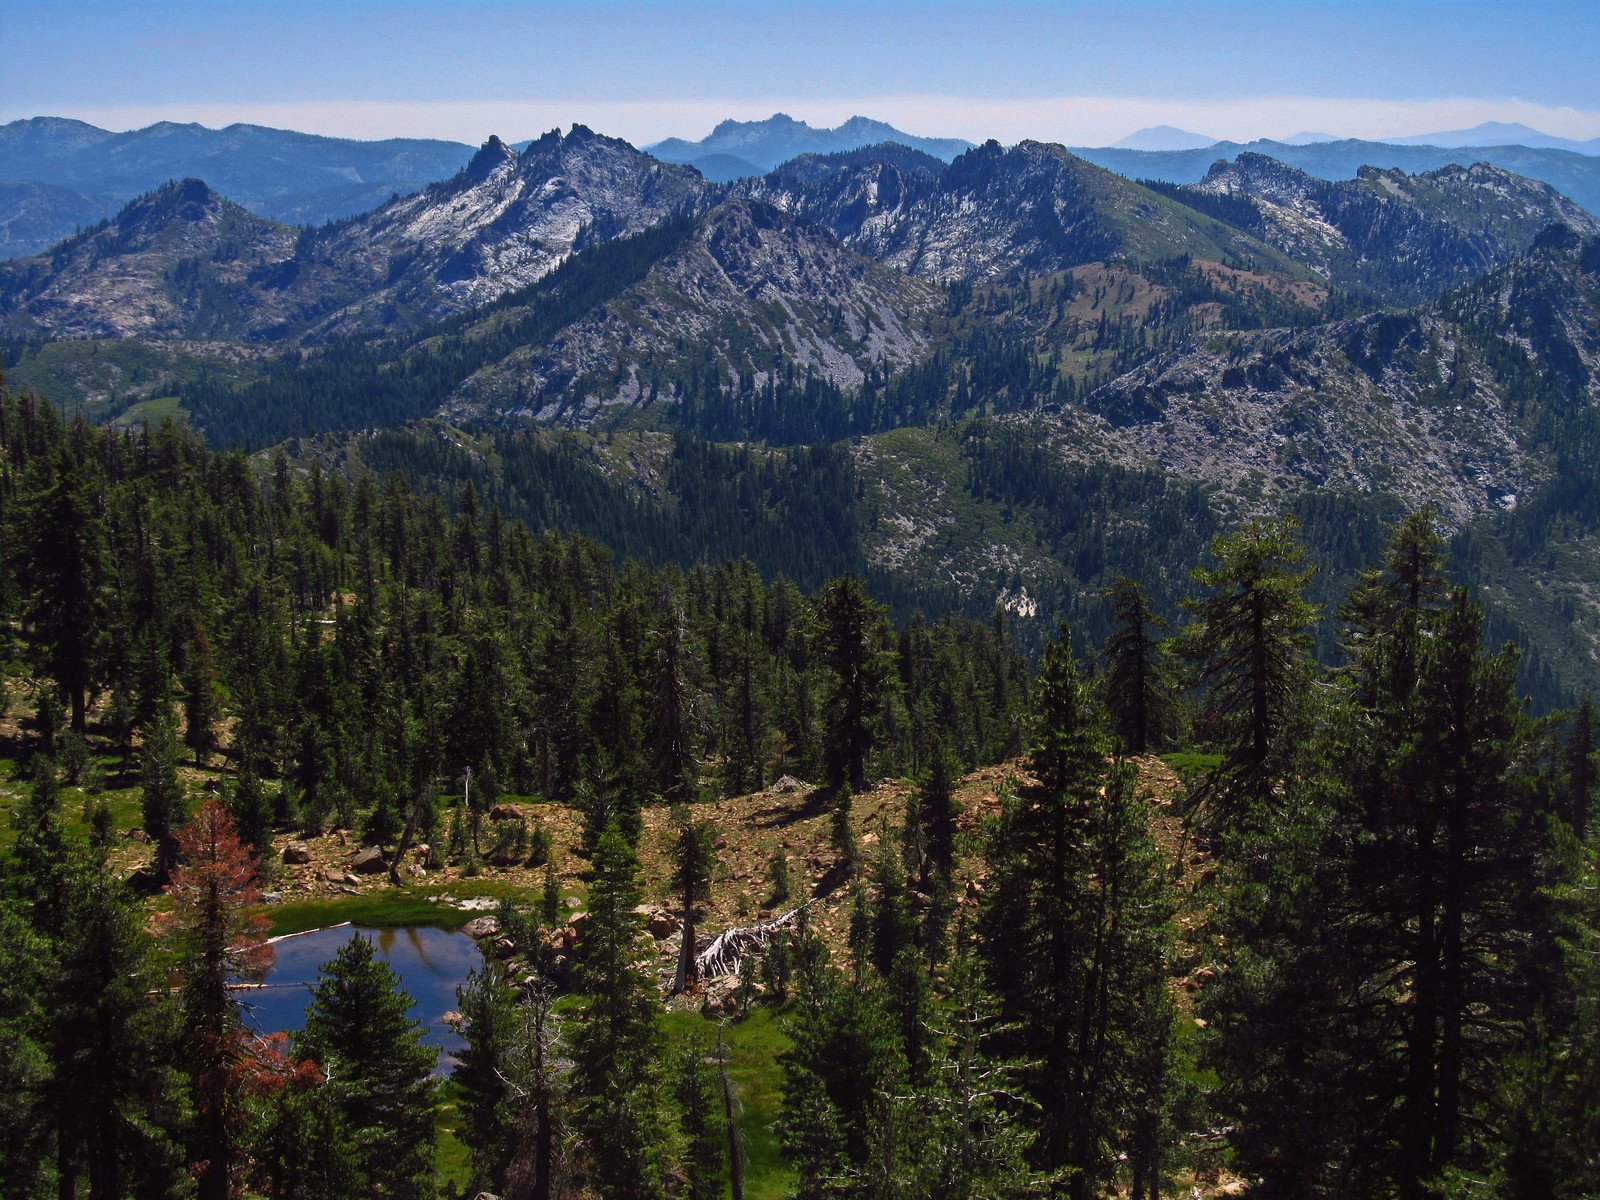 Grand views from the Pacific Crest Trail in far Northern California.